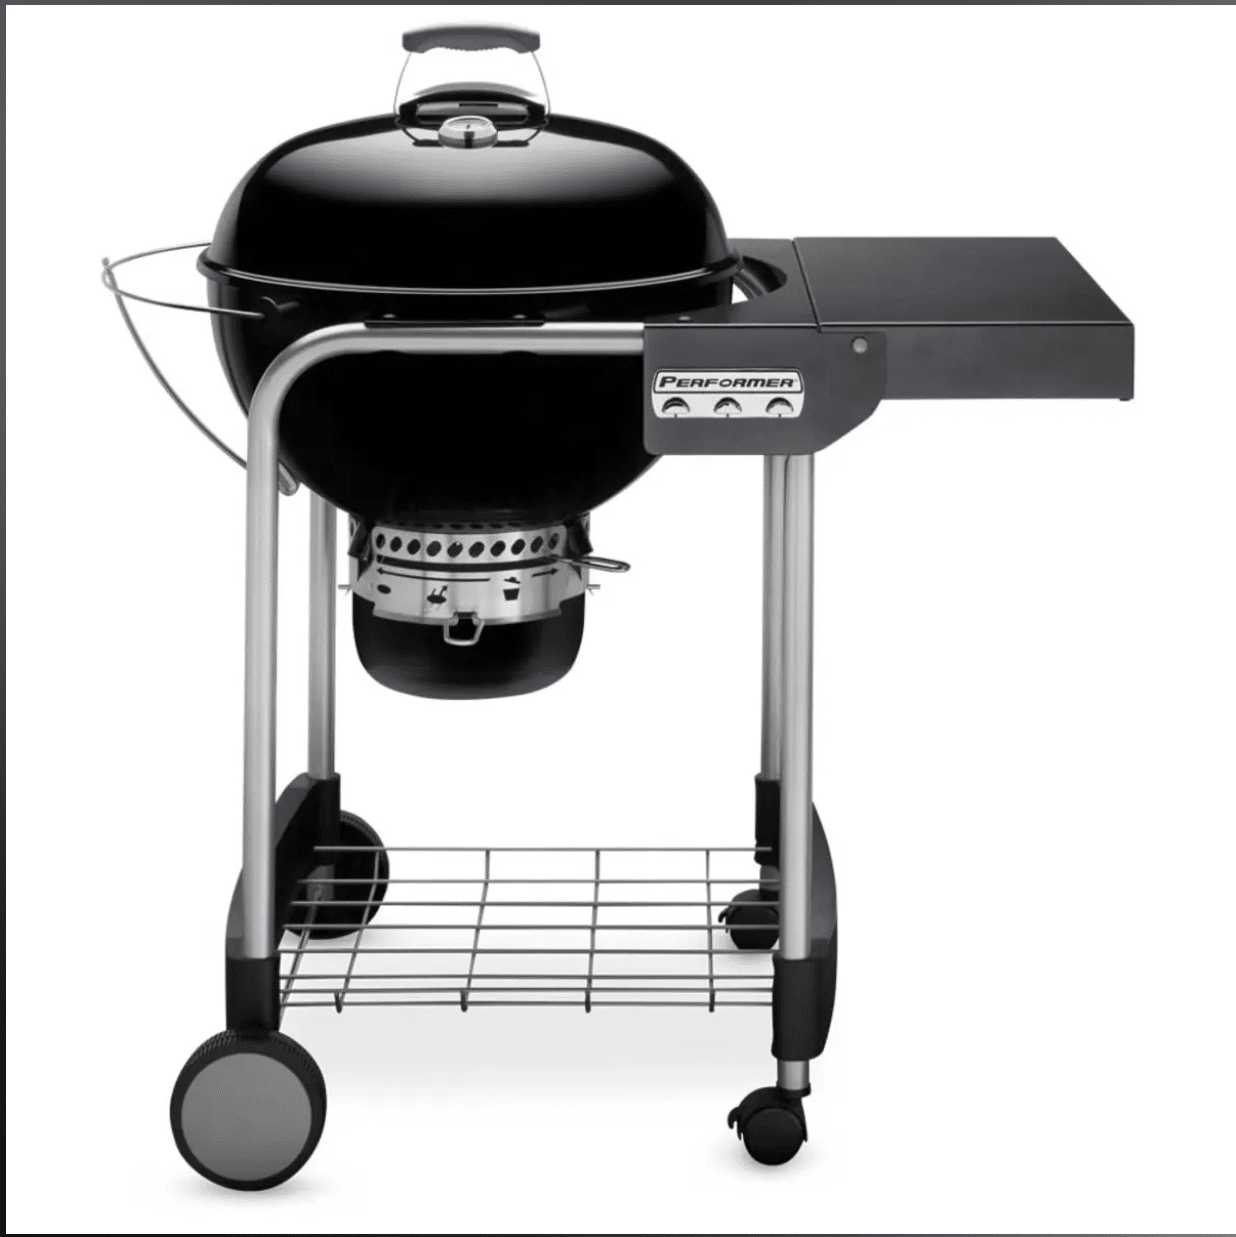 Weber Performer GBS Charcoal Grill Barbecue 57cm 15301004 - 3117 (Copy)